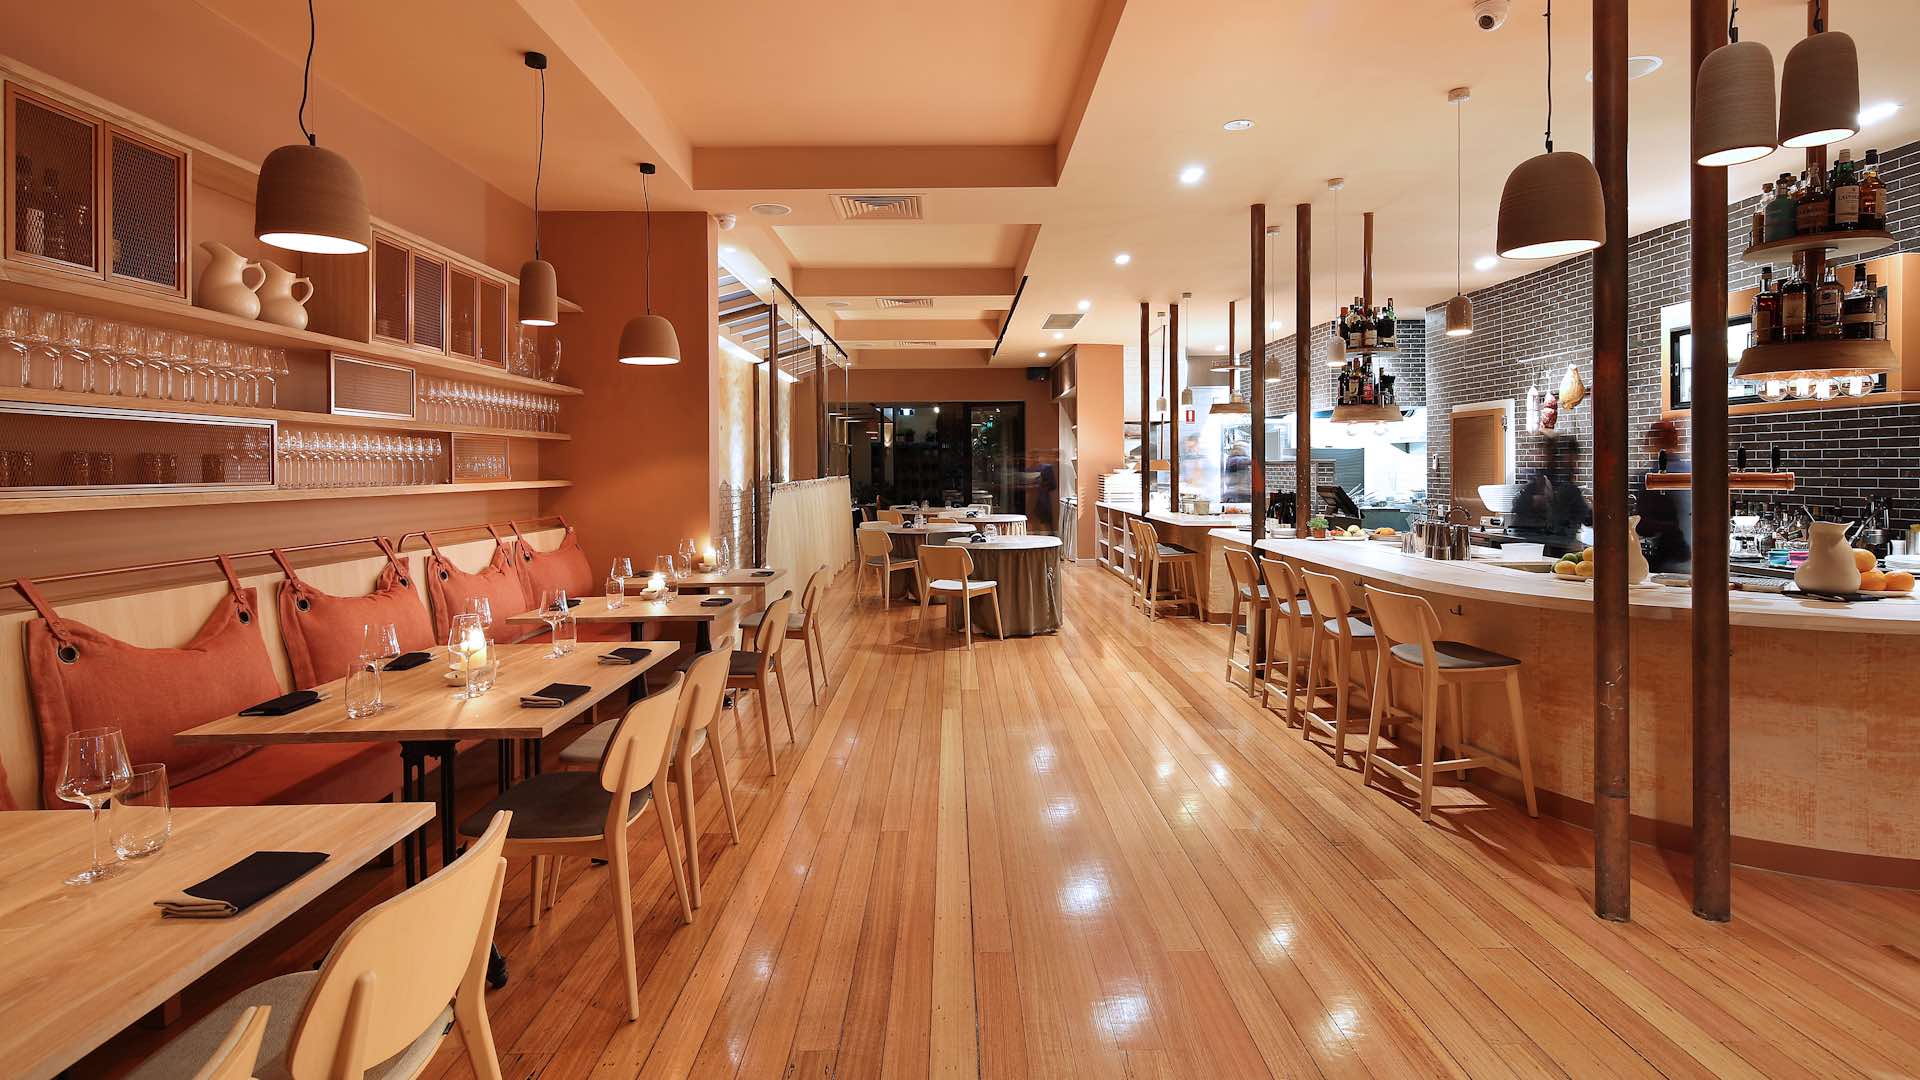 South Melbourne Fine Diner Lume Has Launched Into 2019 with a New Chef and Menu